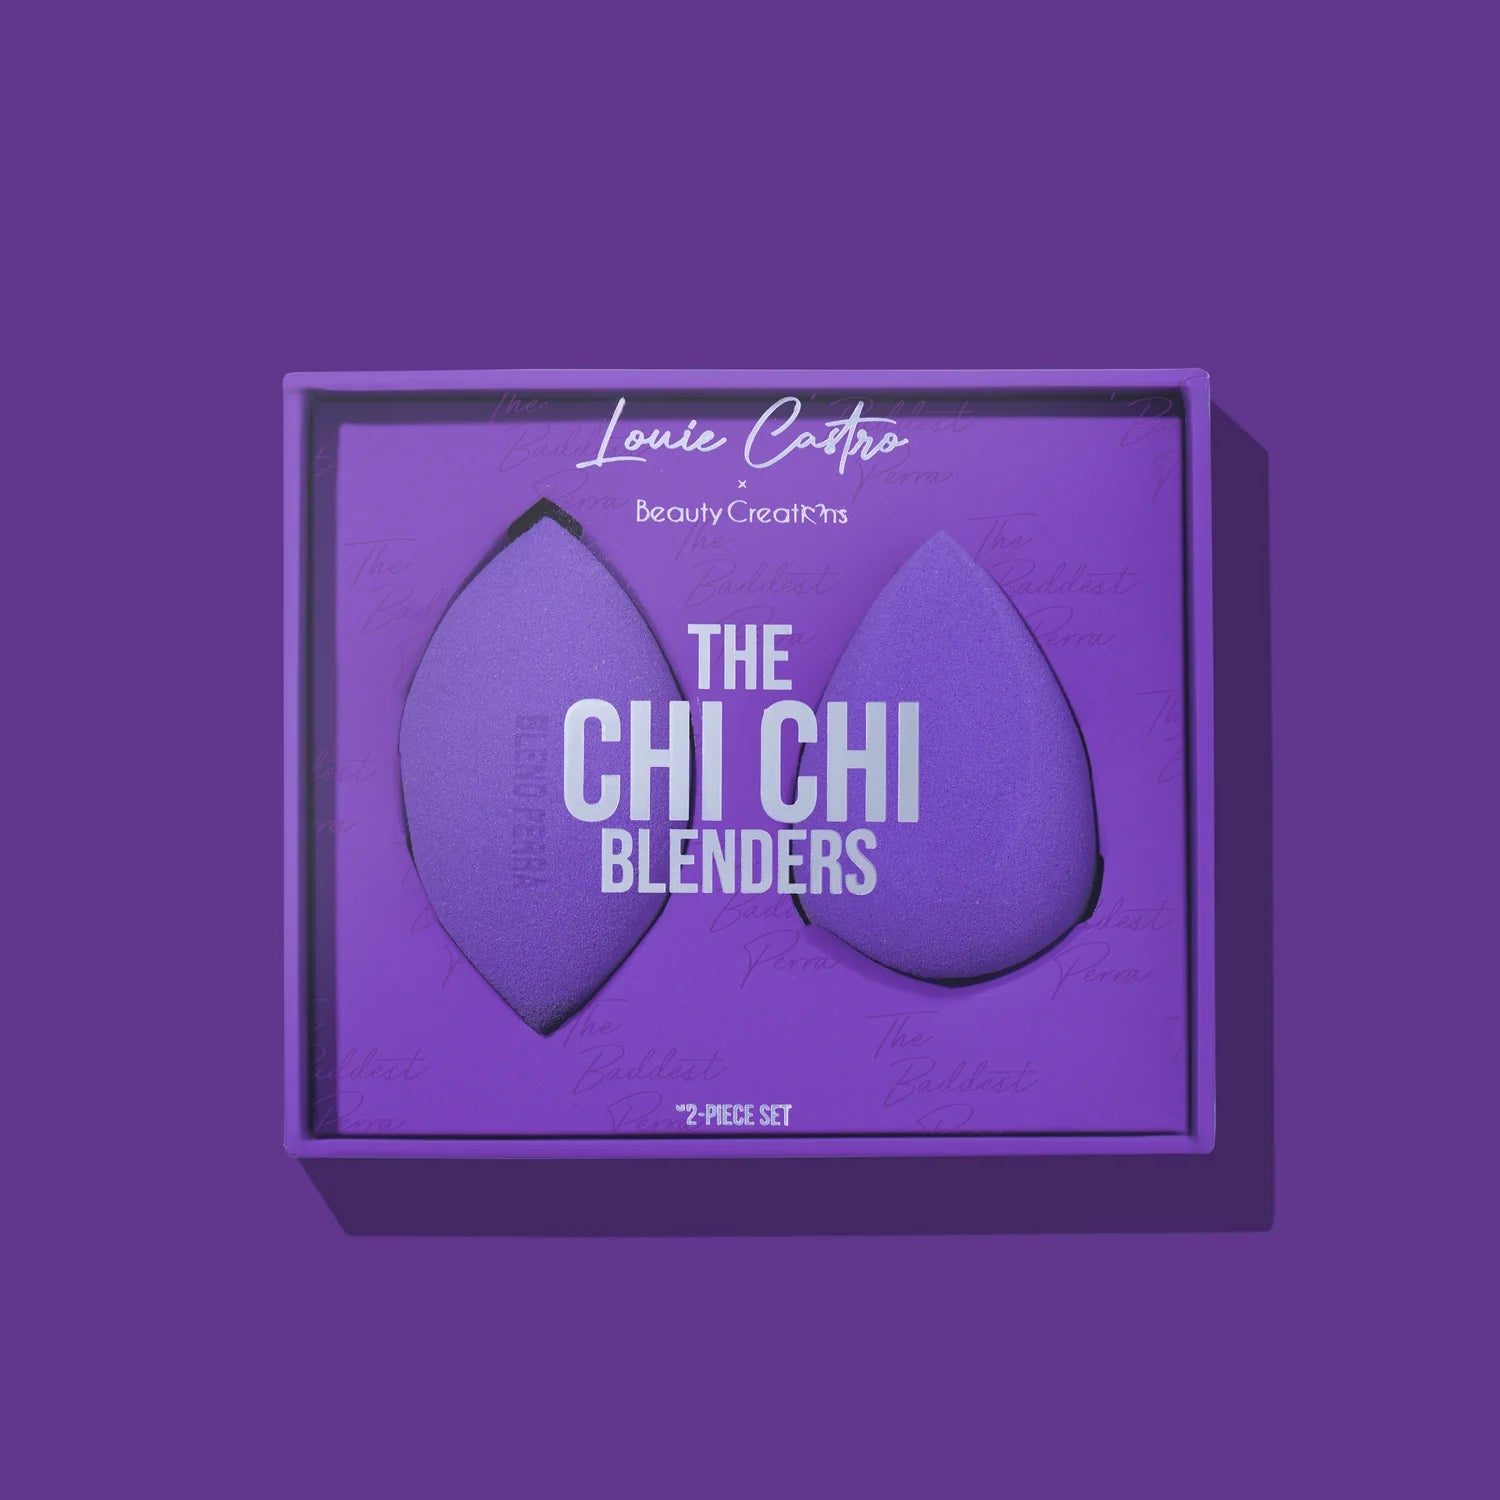 Beauty Creations - Louie Castro The CHI CHI Blenders Duo